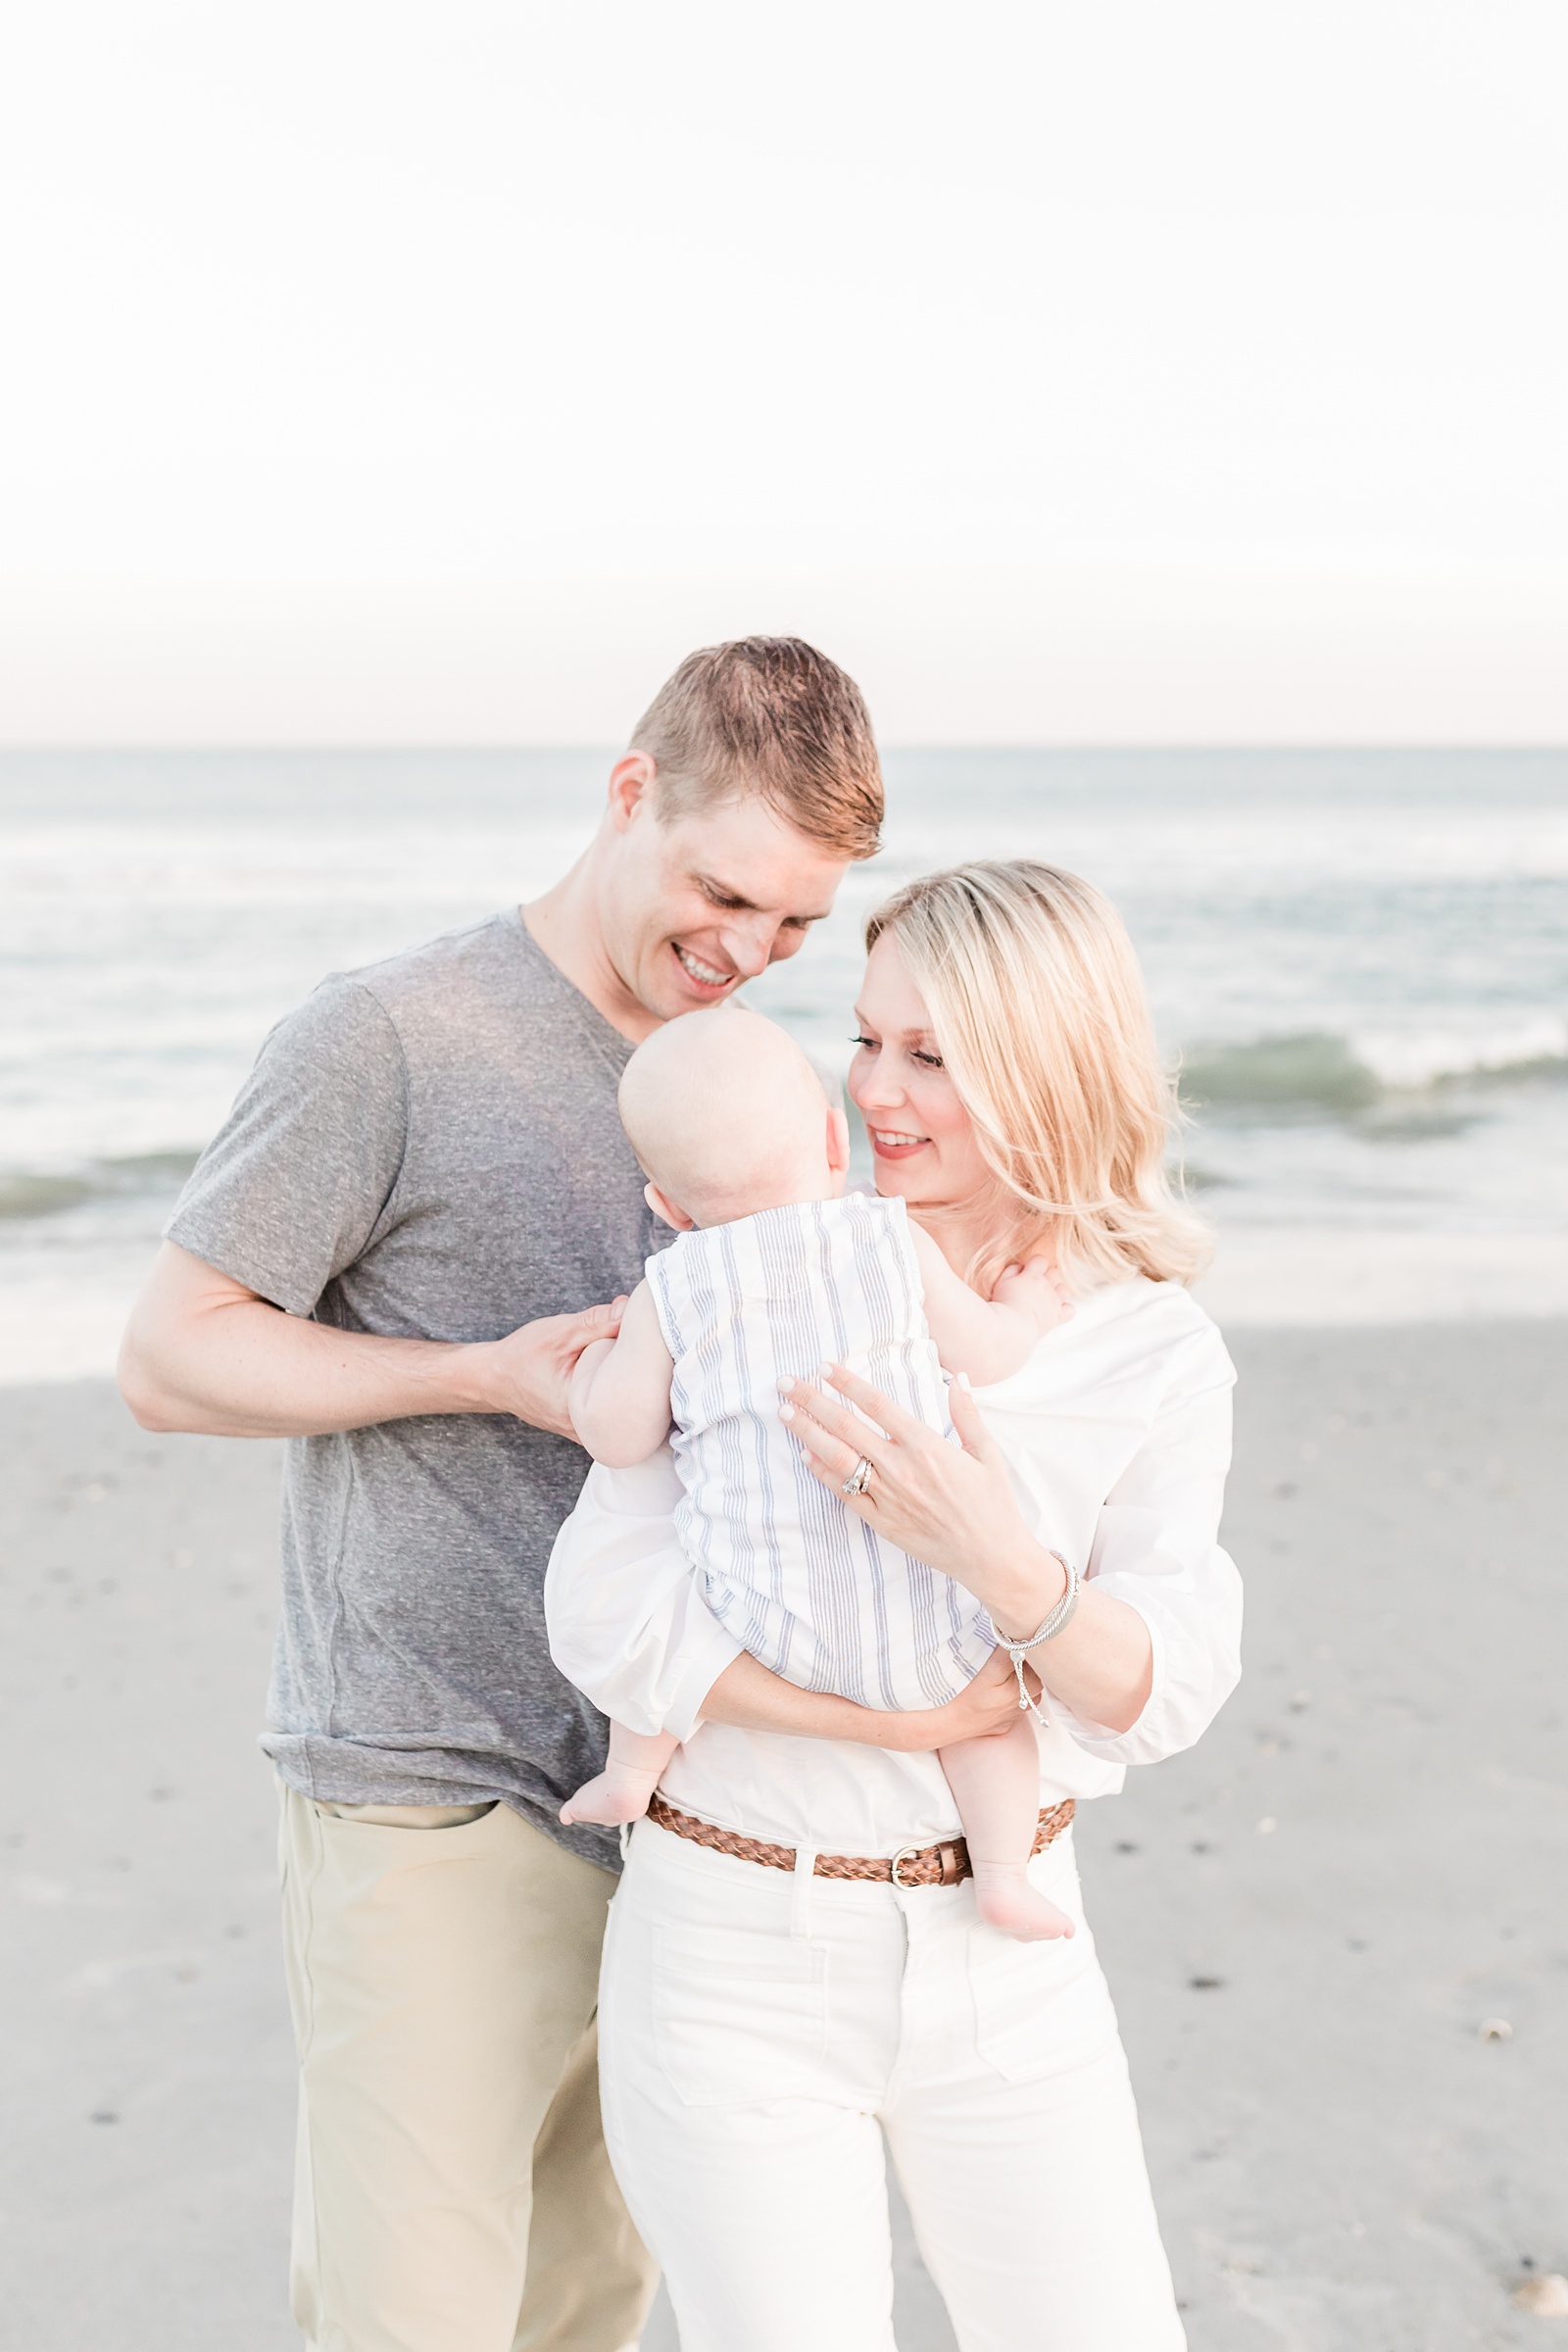 Sunset beach family session in Charleston, SC with Caitlyn Motycka Photography